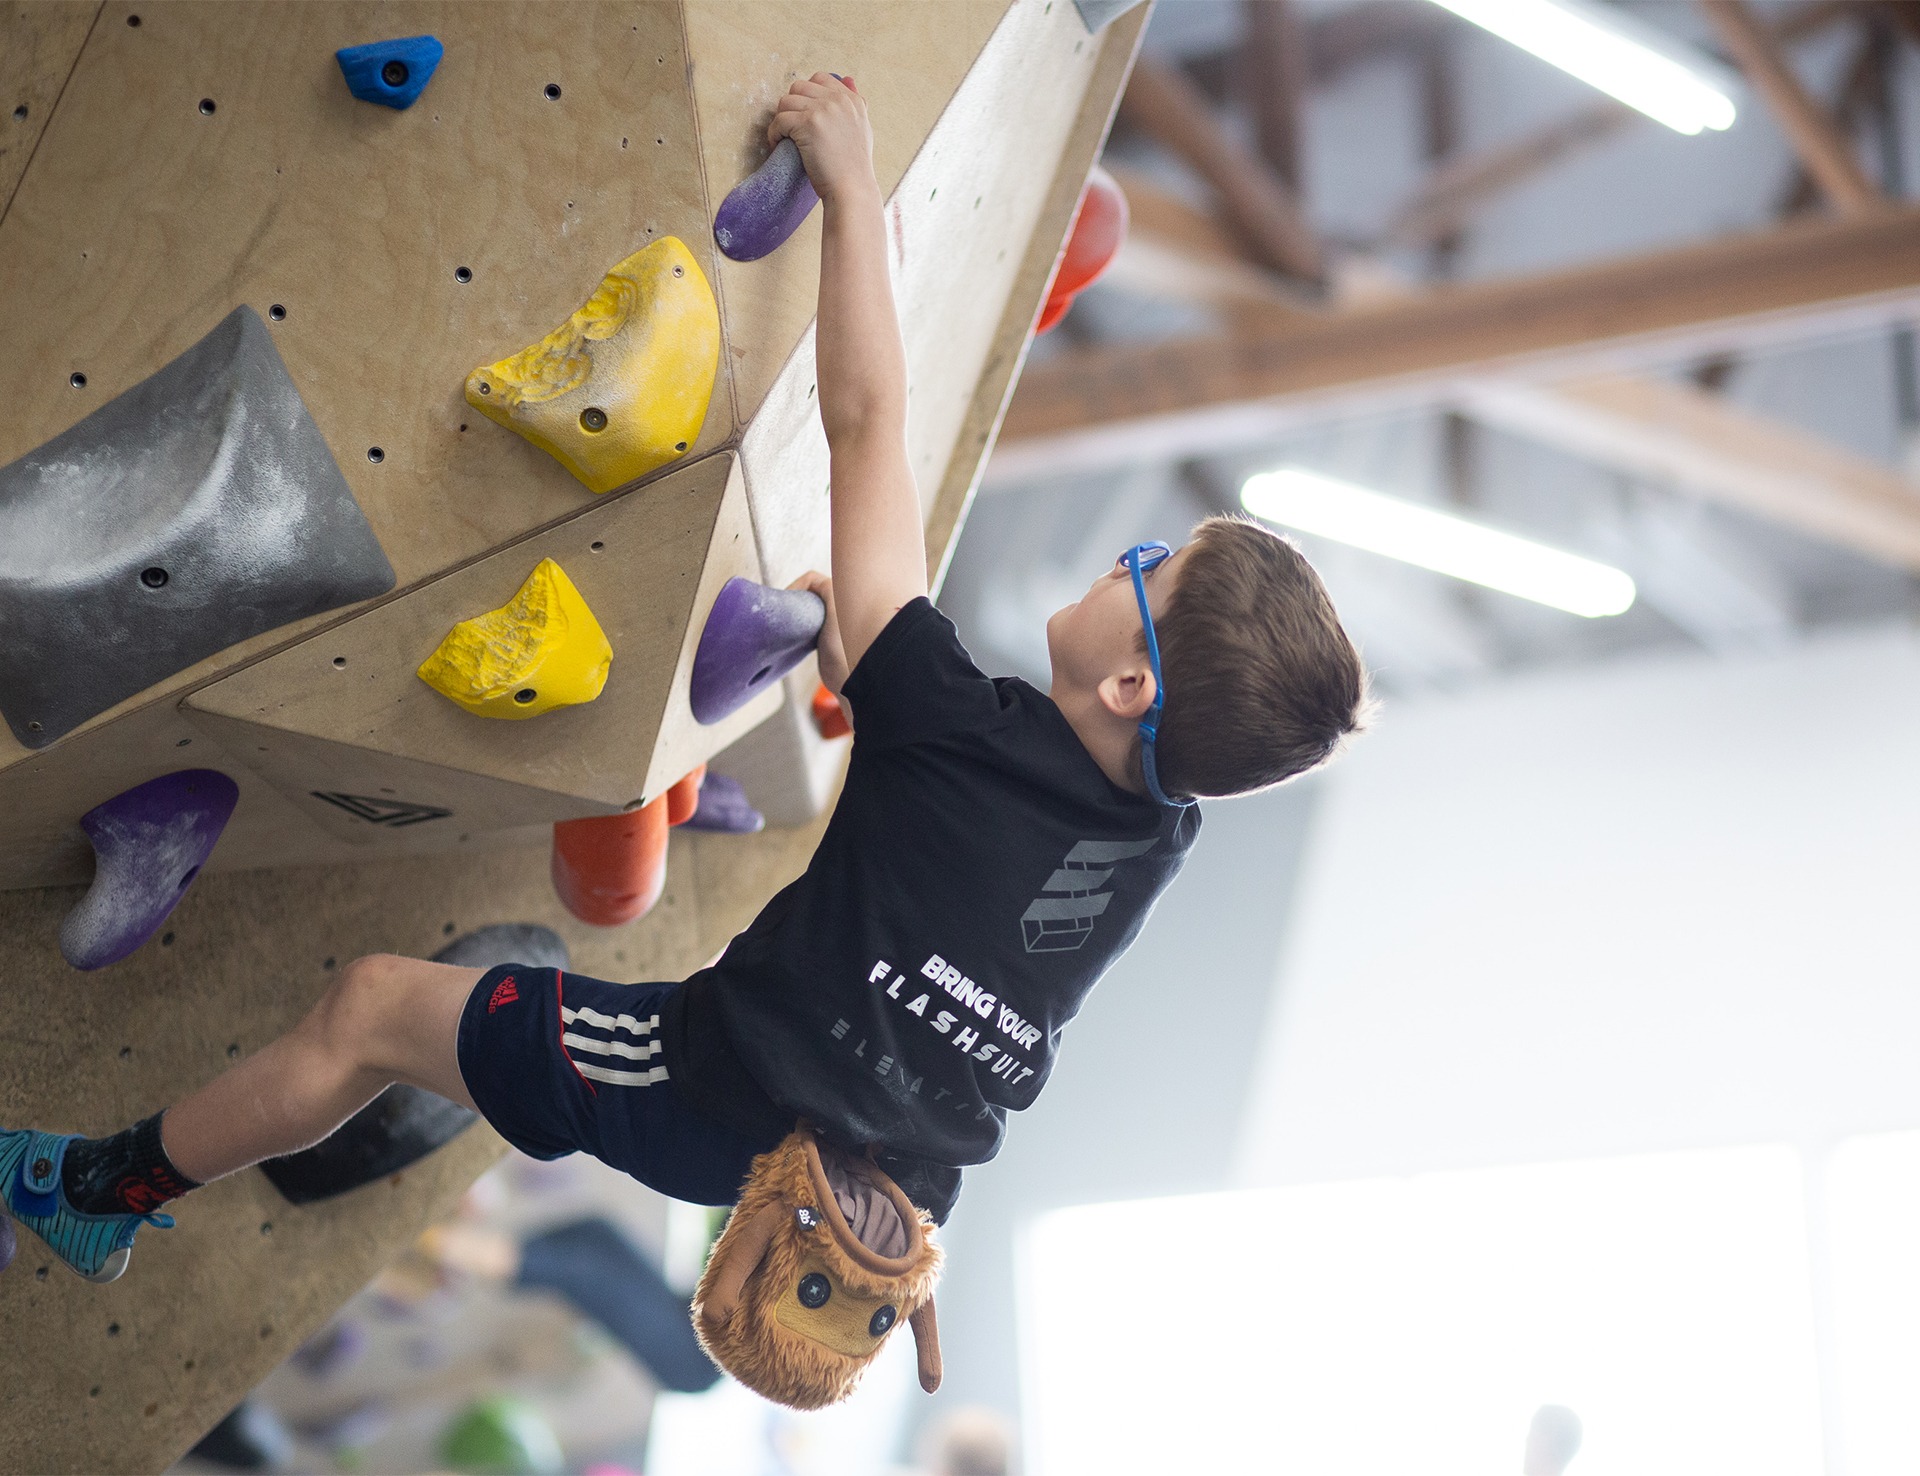 A kid climbing at the gym